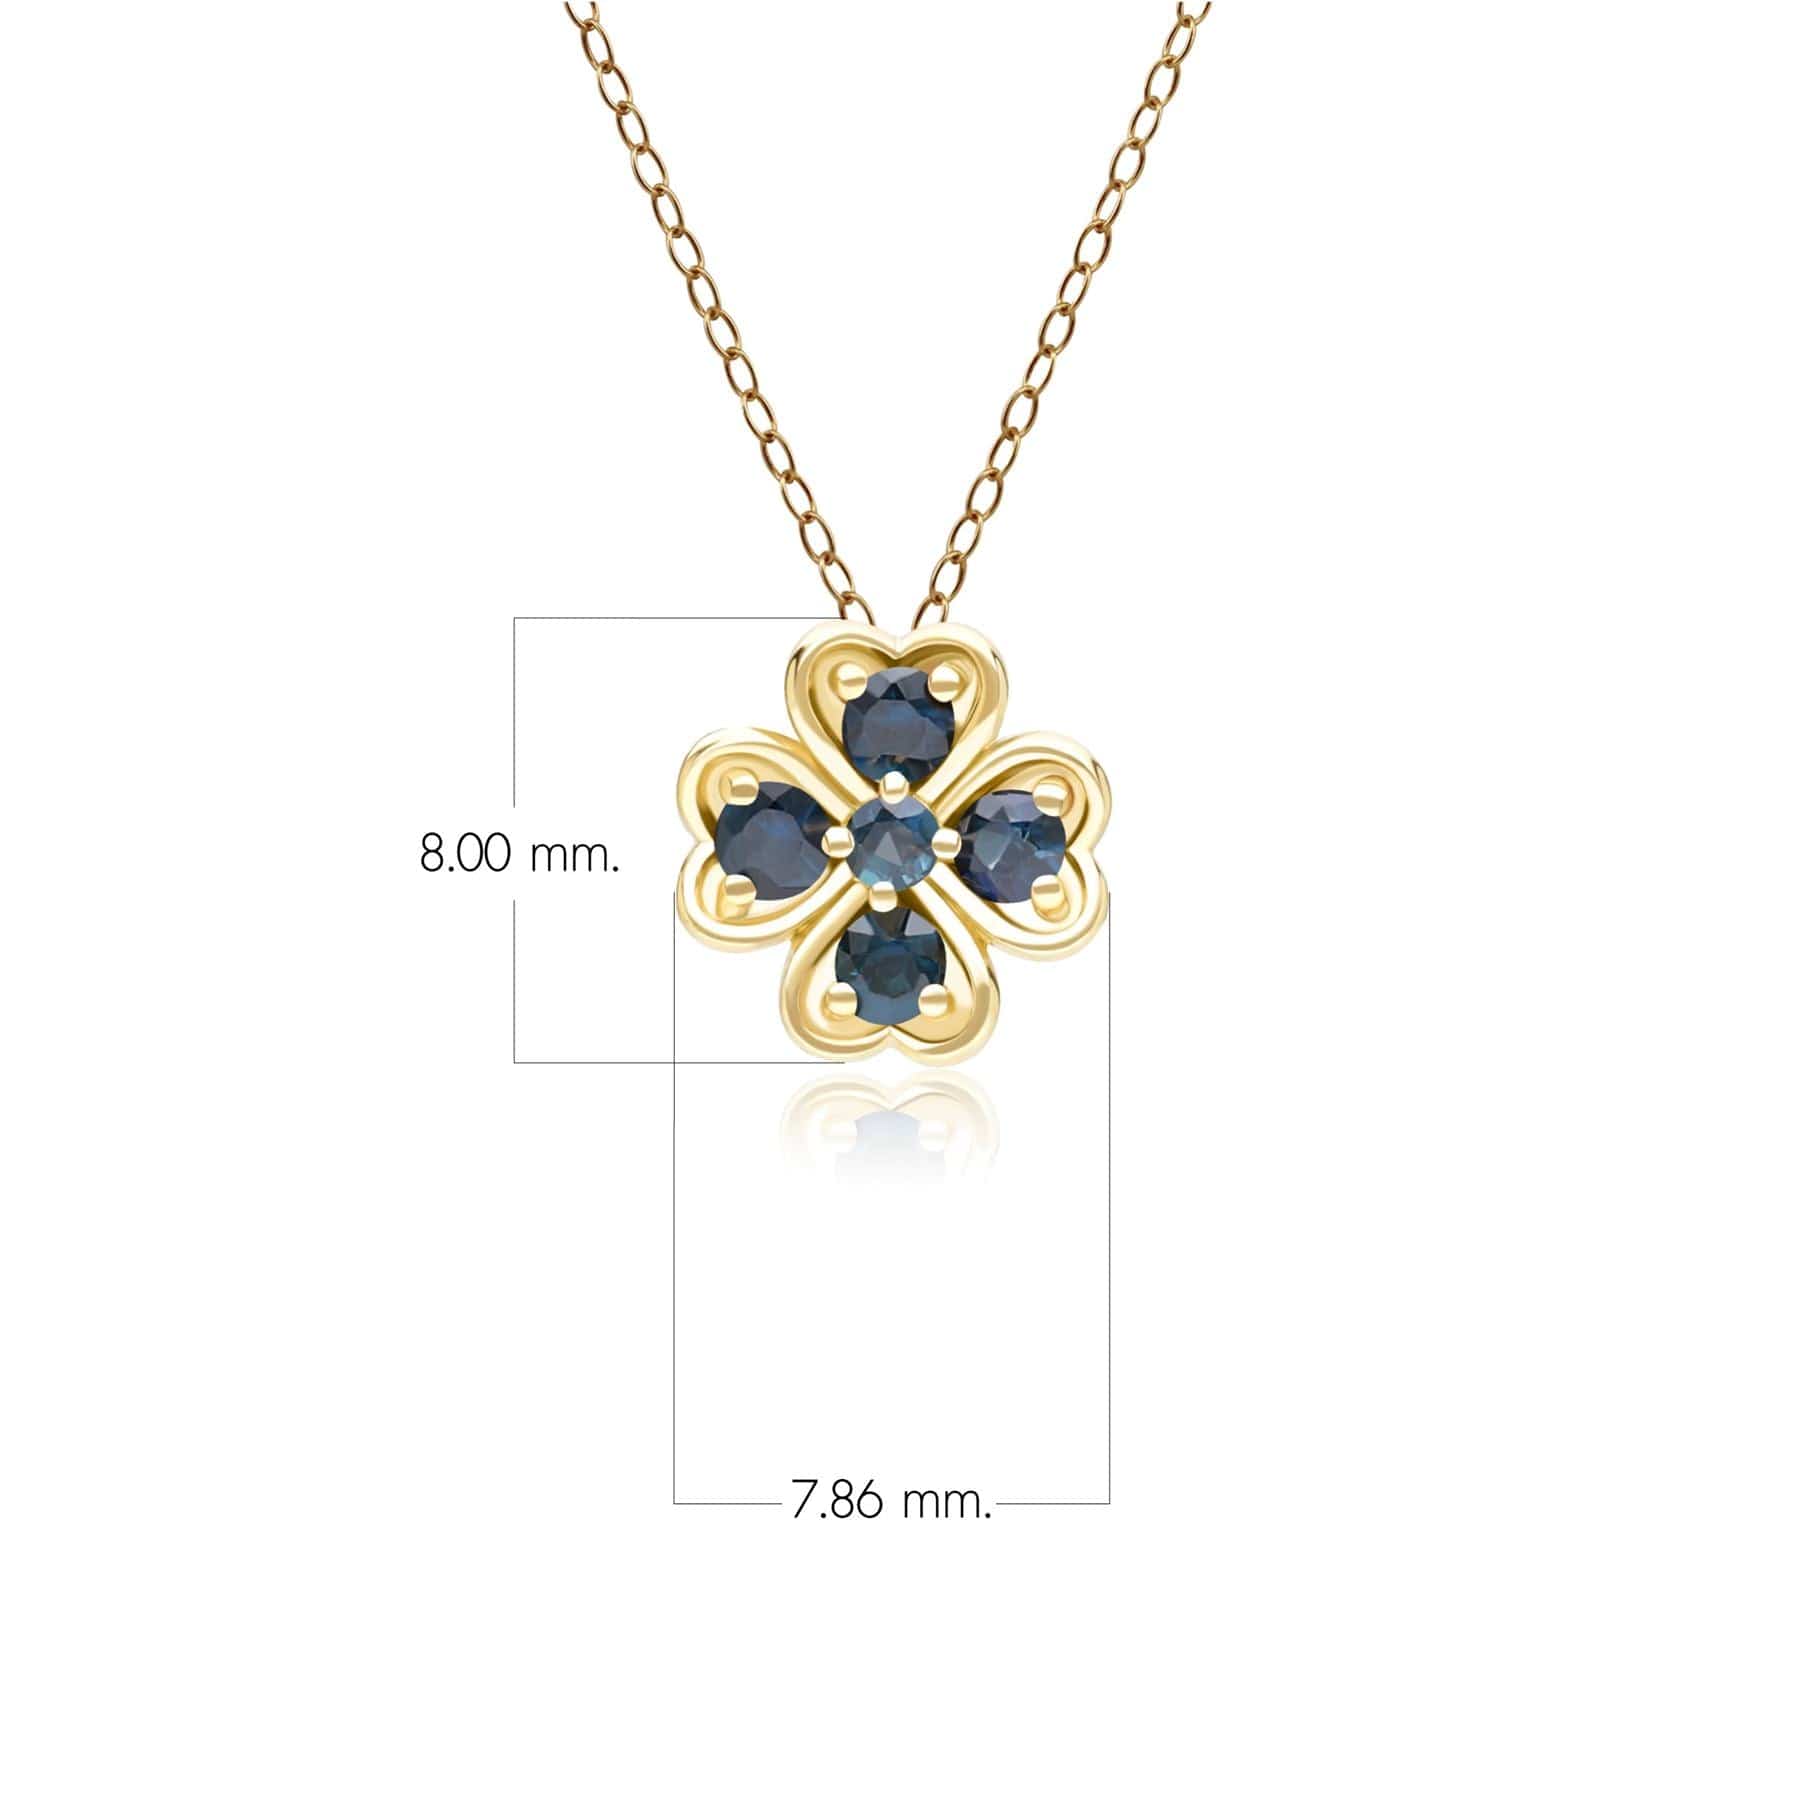 135P2127039 Gardenia Round Sapphire Clover Pendant Necklace in 9ct Yellow Gold Dimensions